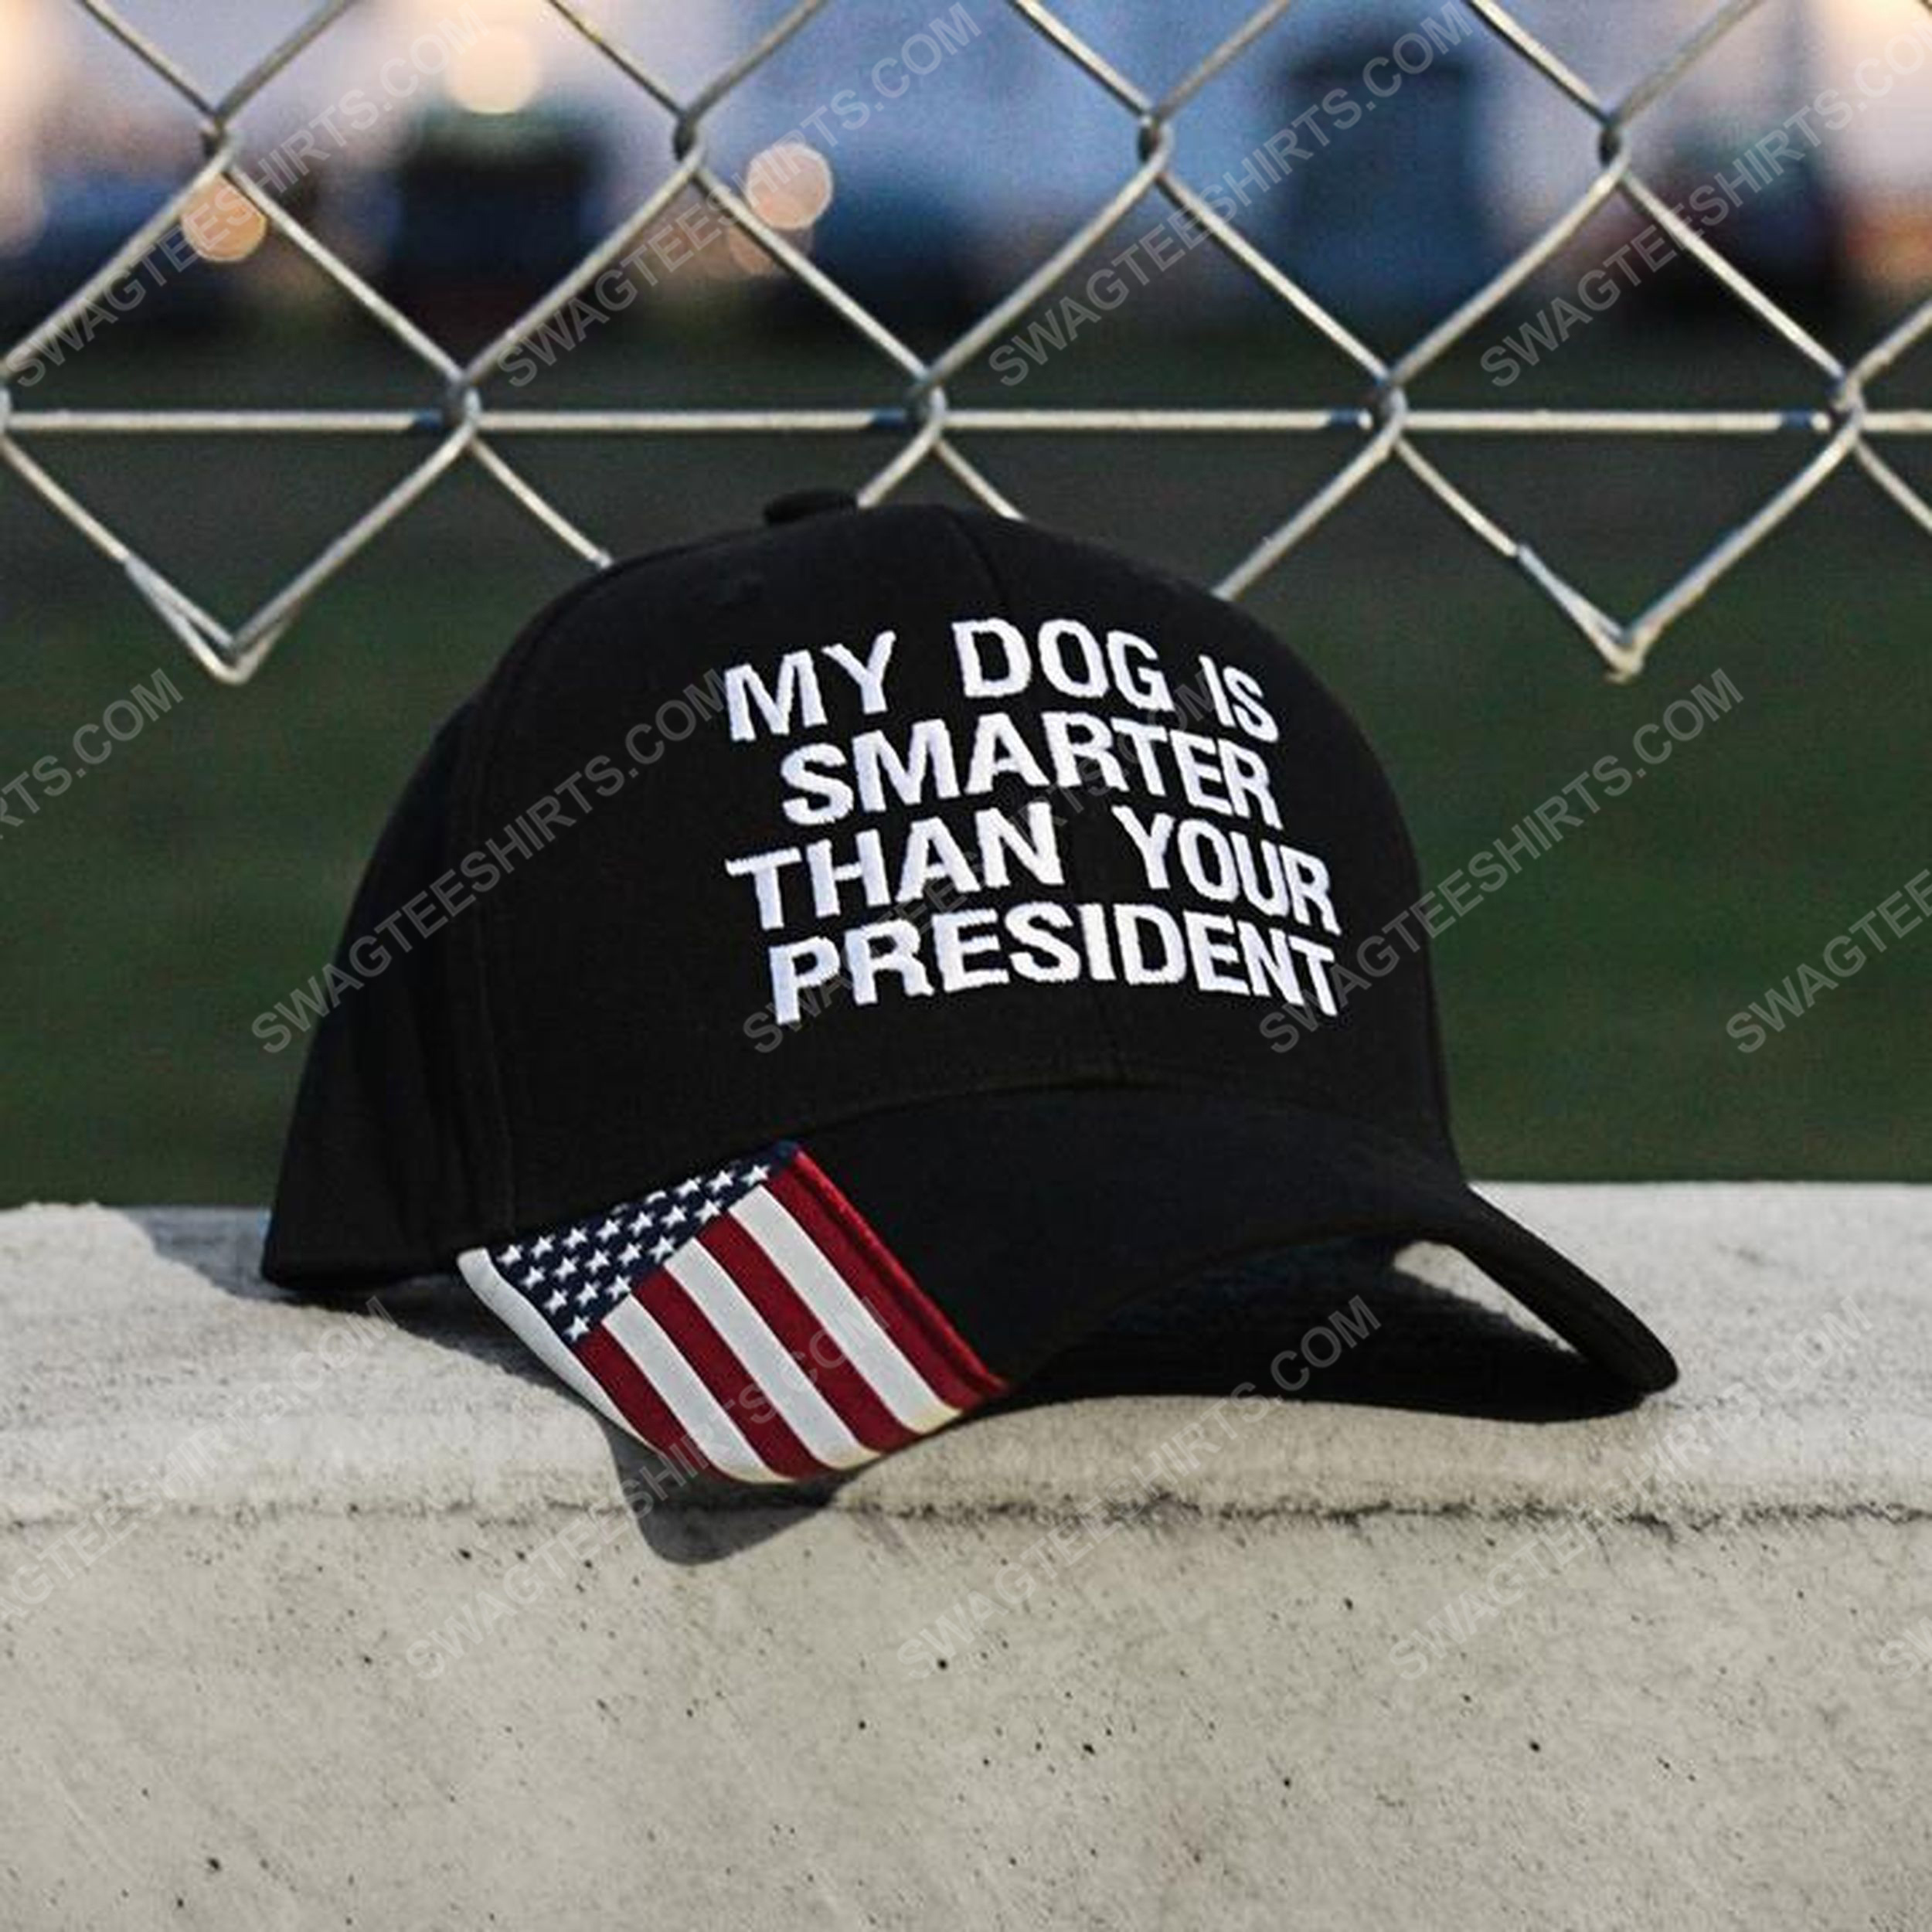 My dog is smarter than your president full print classic hat 1 - Copy (2)